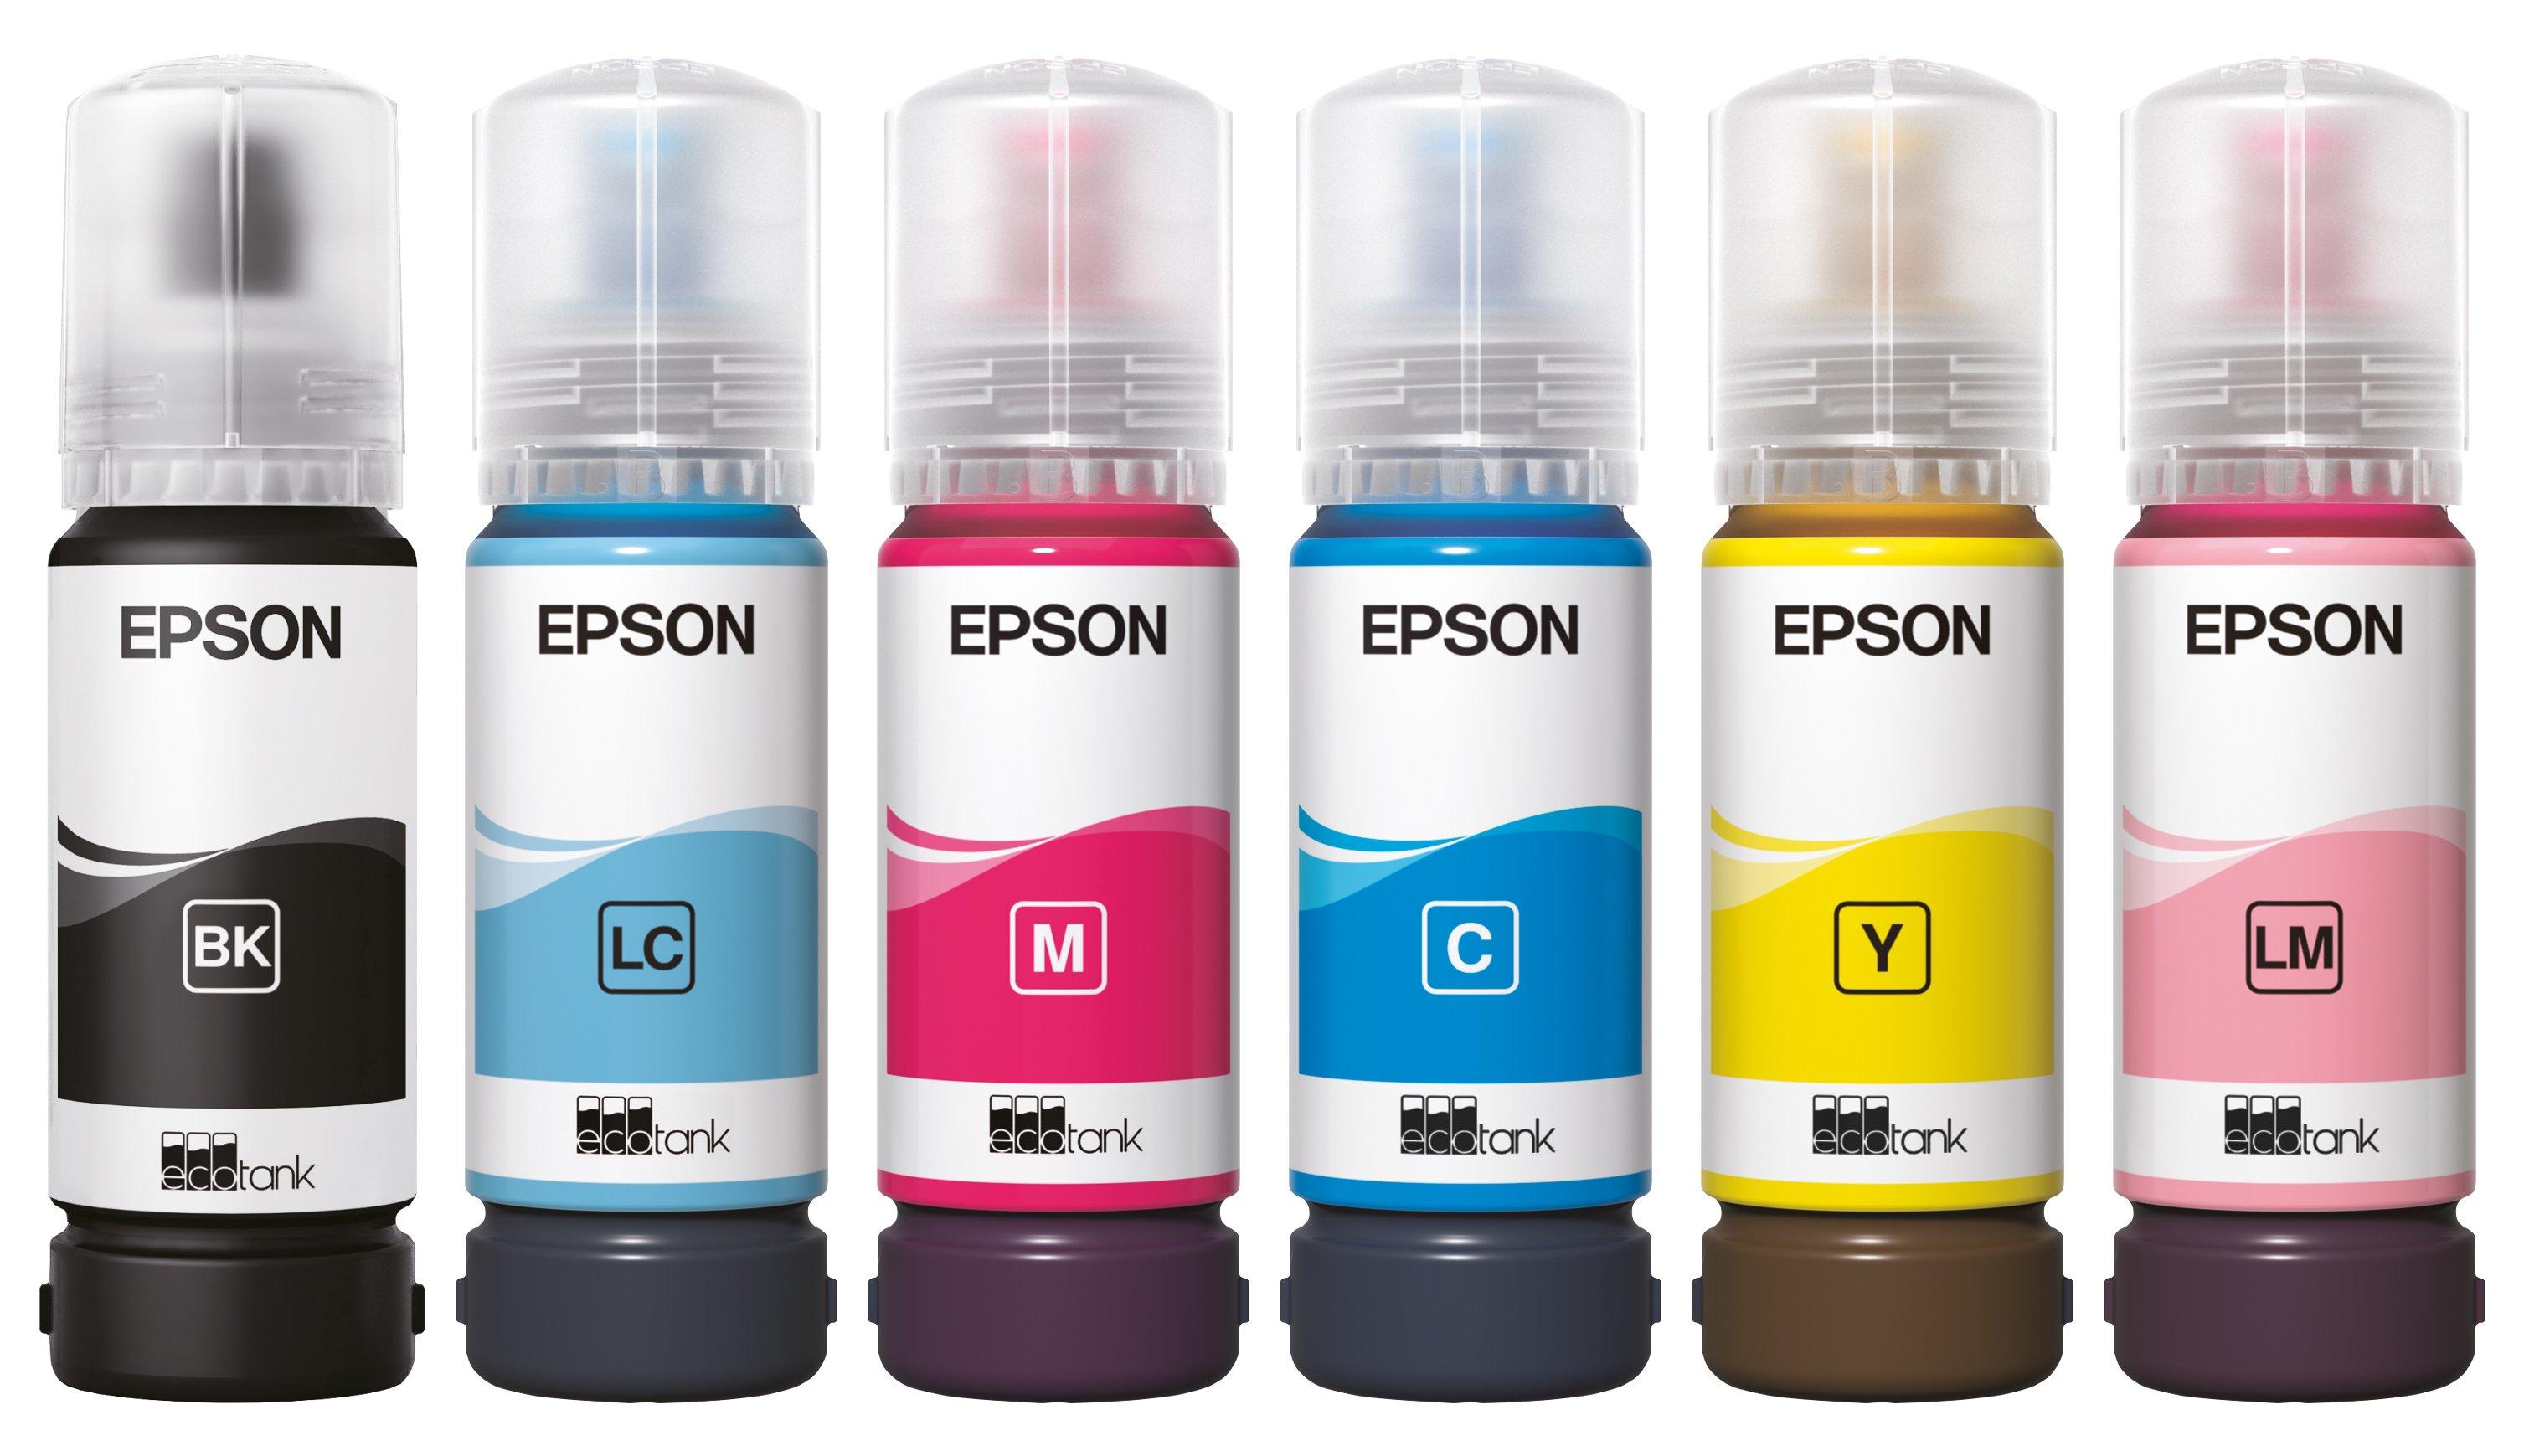 108 Ecotank Light Cyan Ink Bottle Ink Consumables Ink And Paper Products Epson Europe 5019